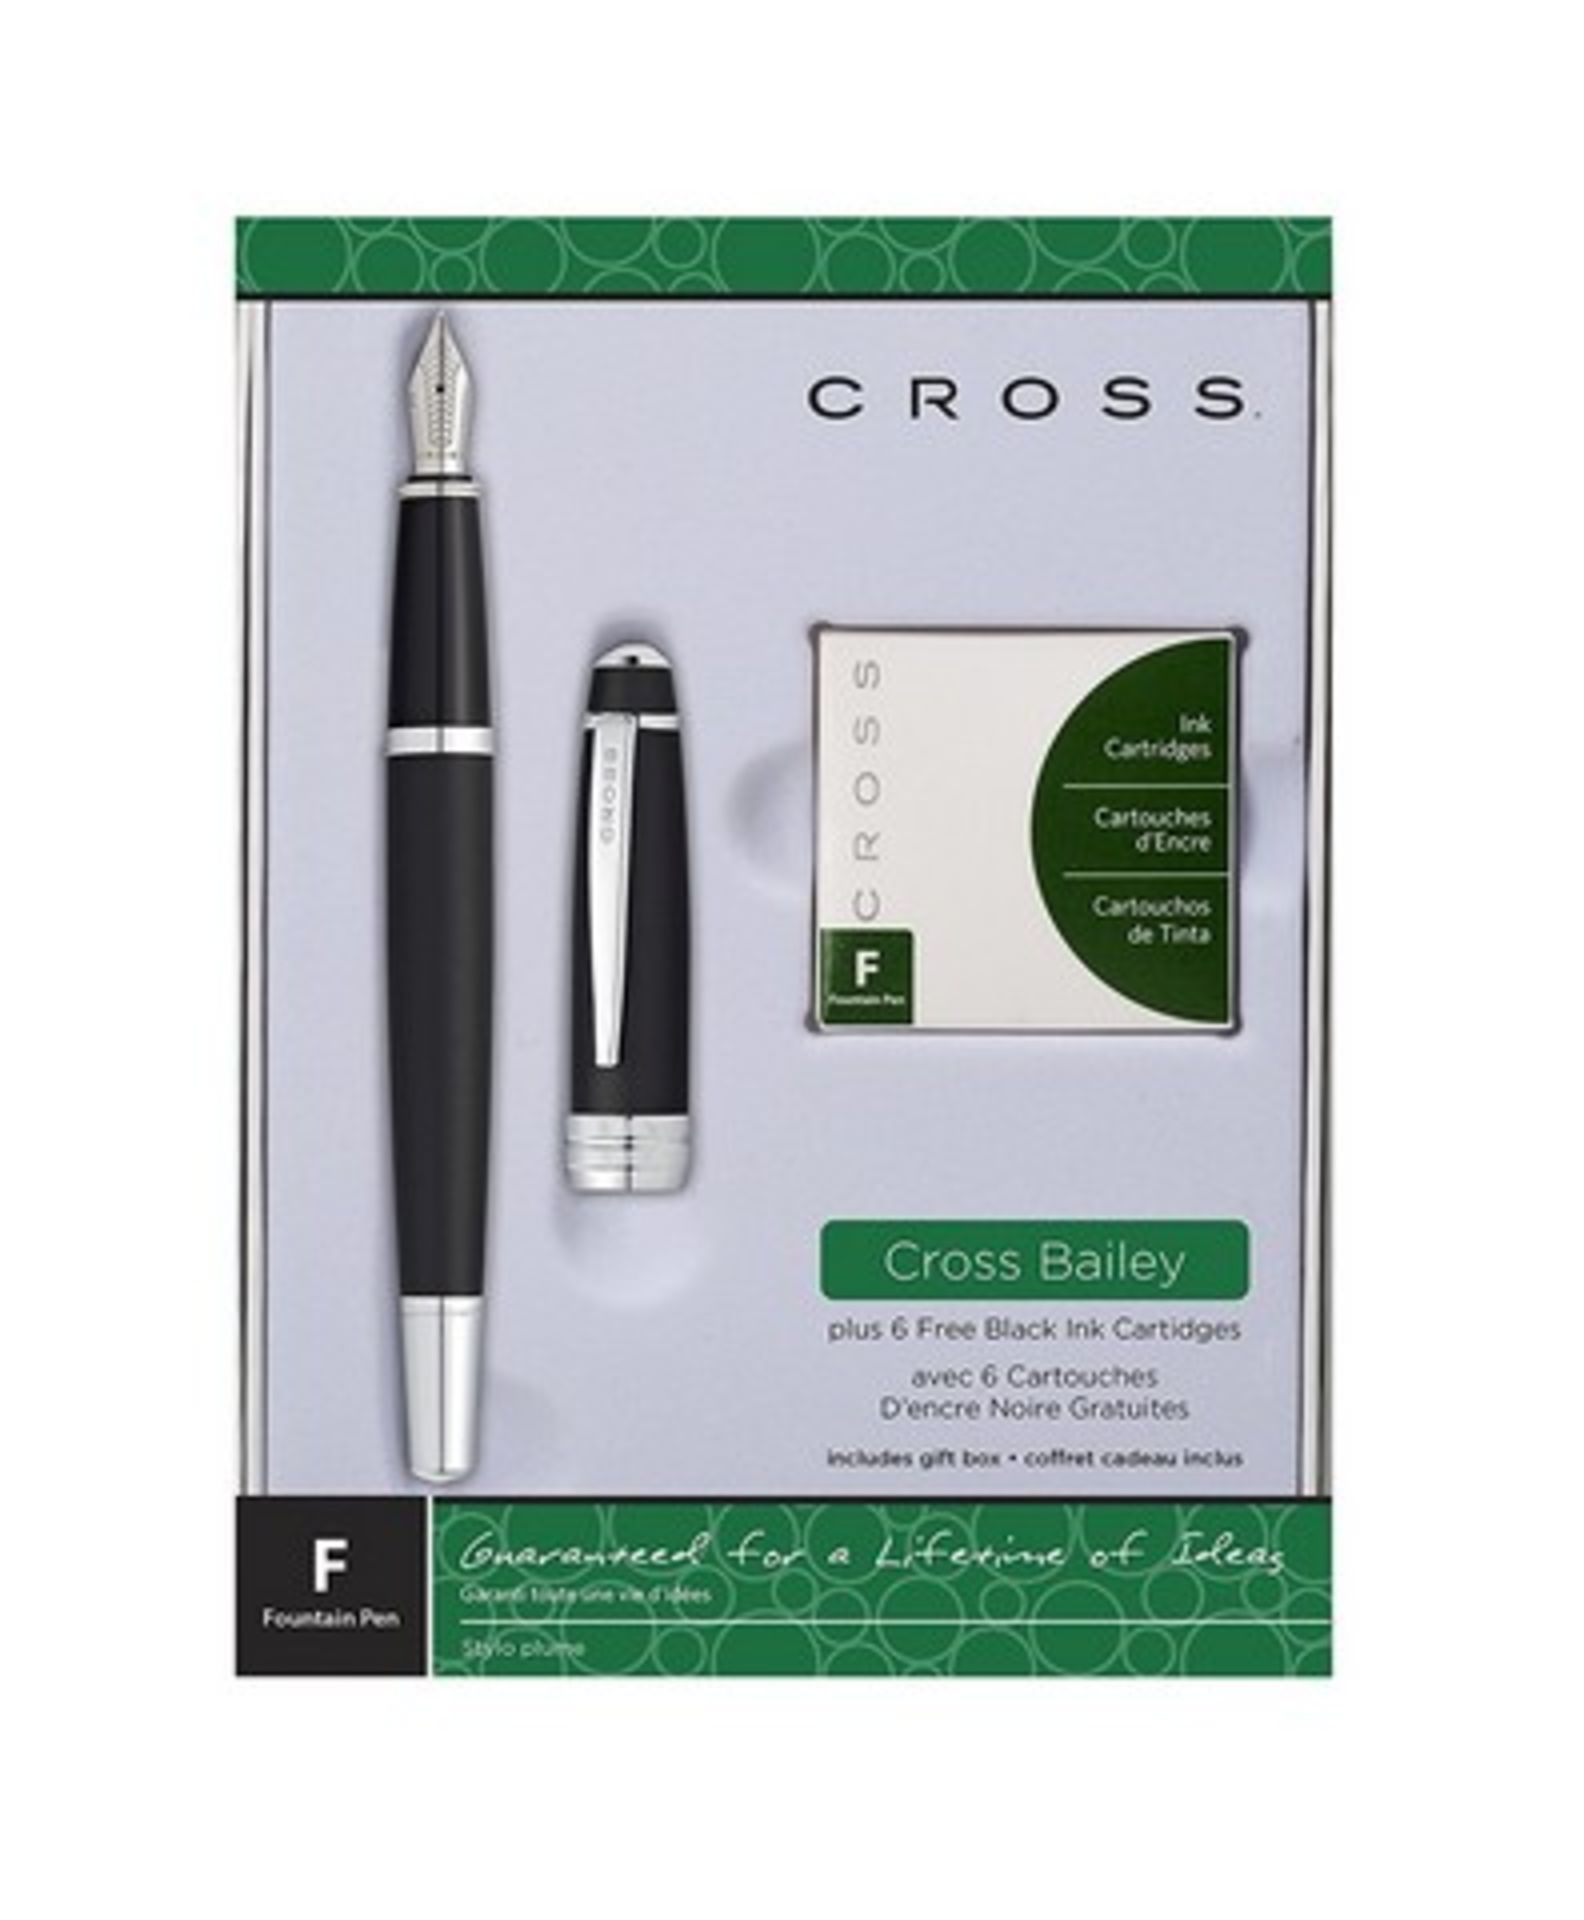 V Brand New Cross Bailey Fountain Pen In Gift Box with 6 Black Ink Cartridges - Online Price £41.